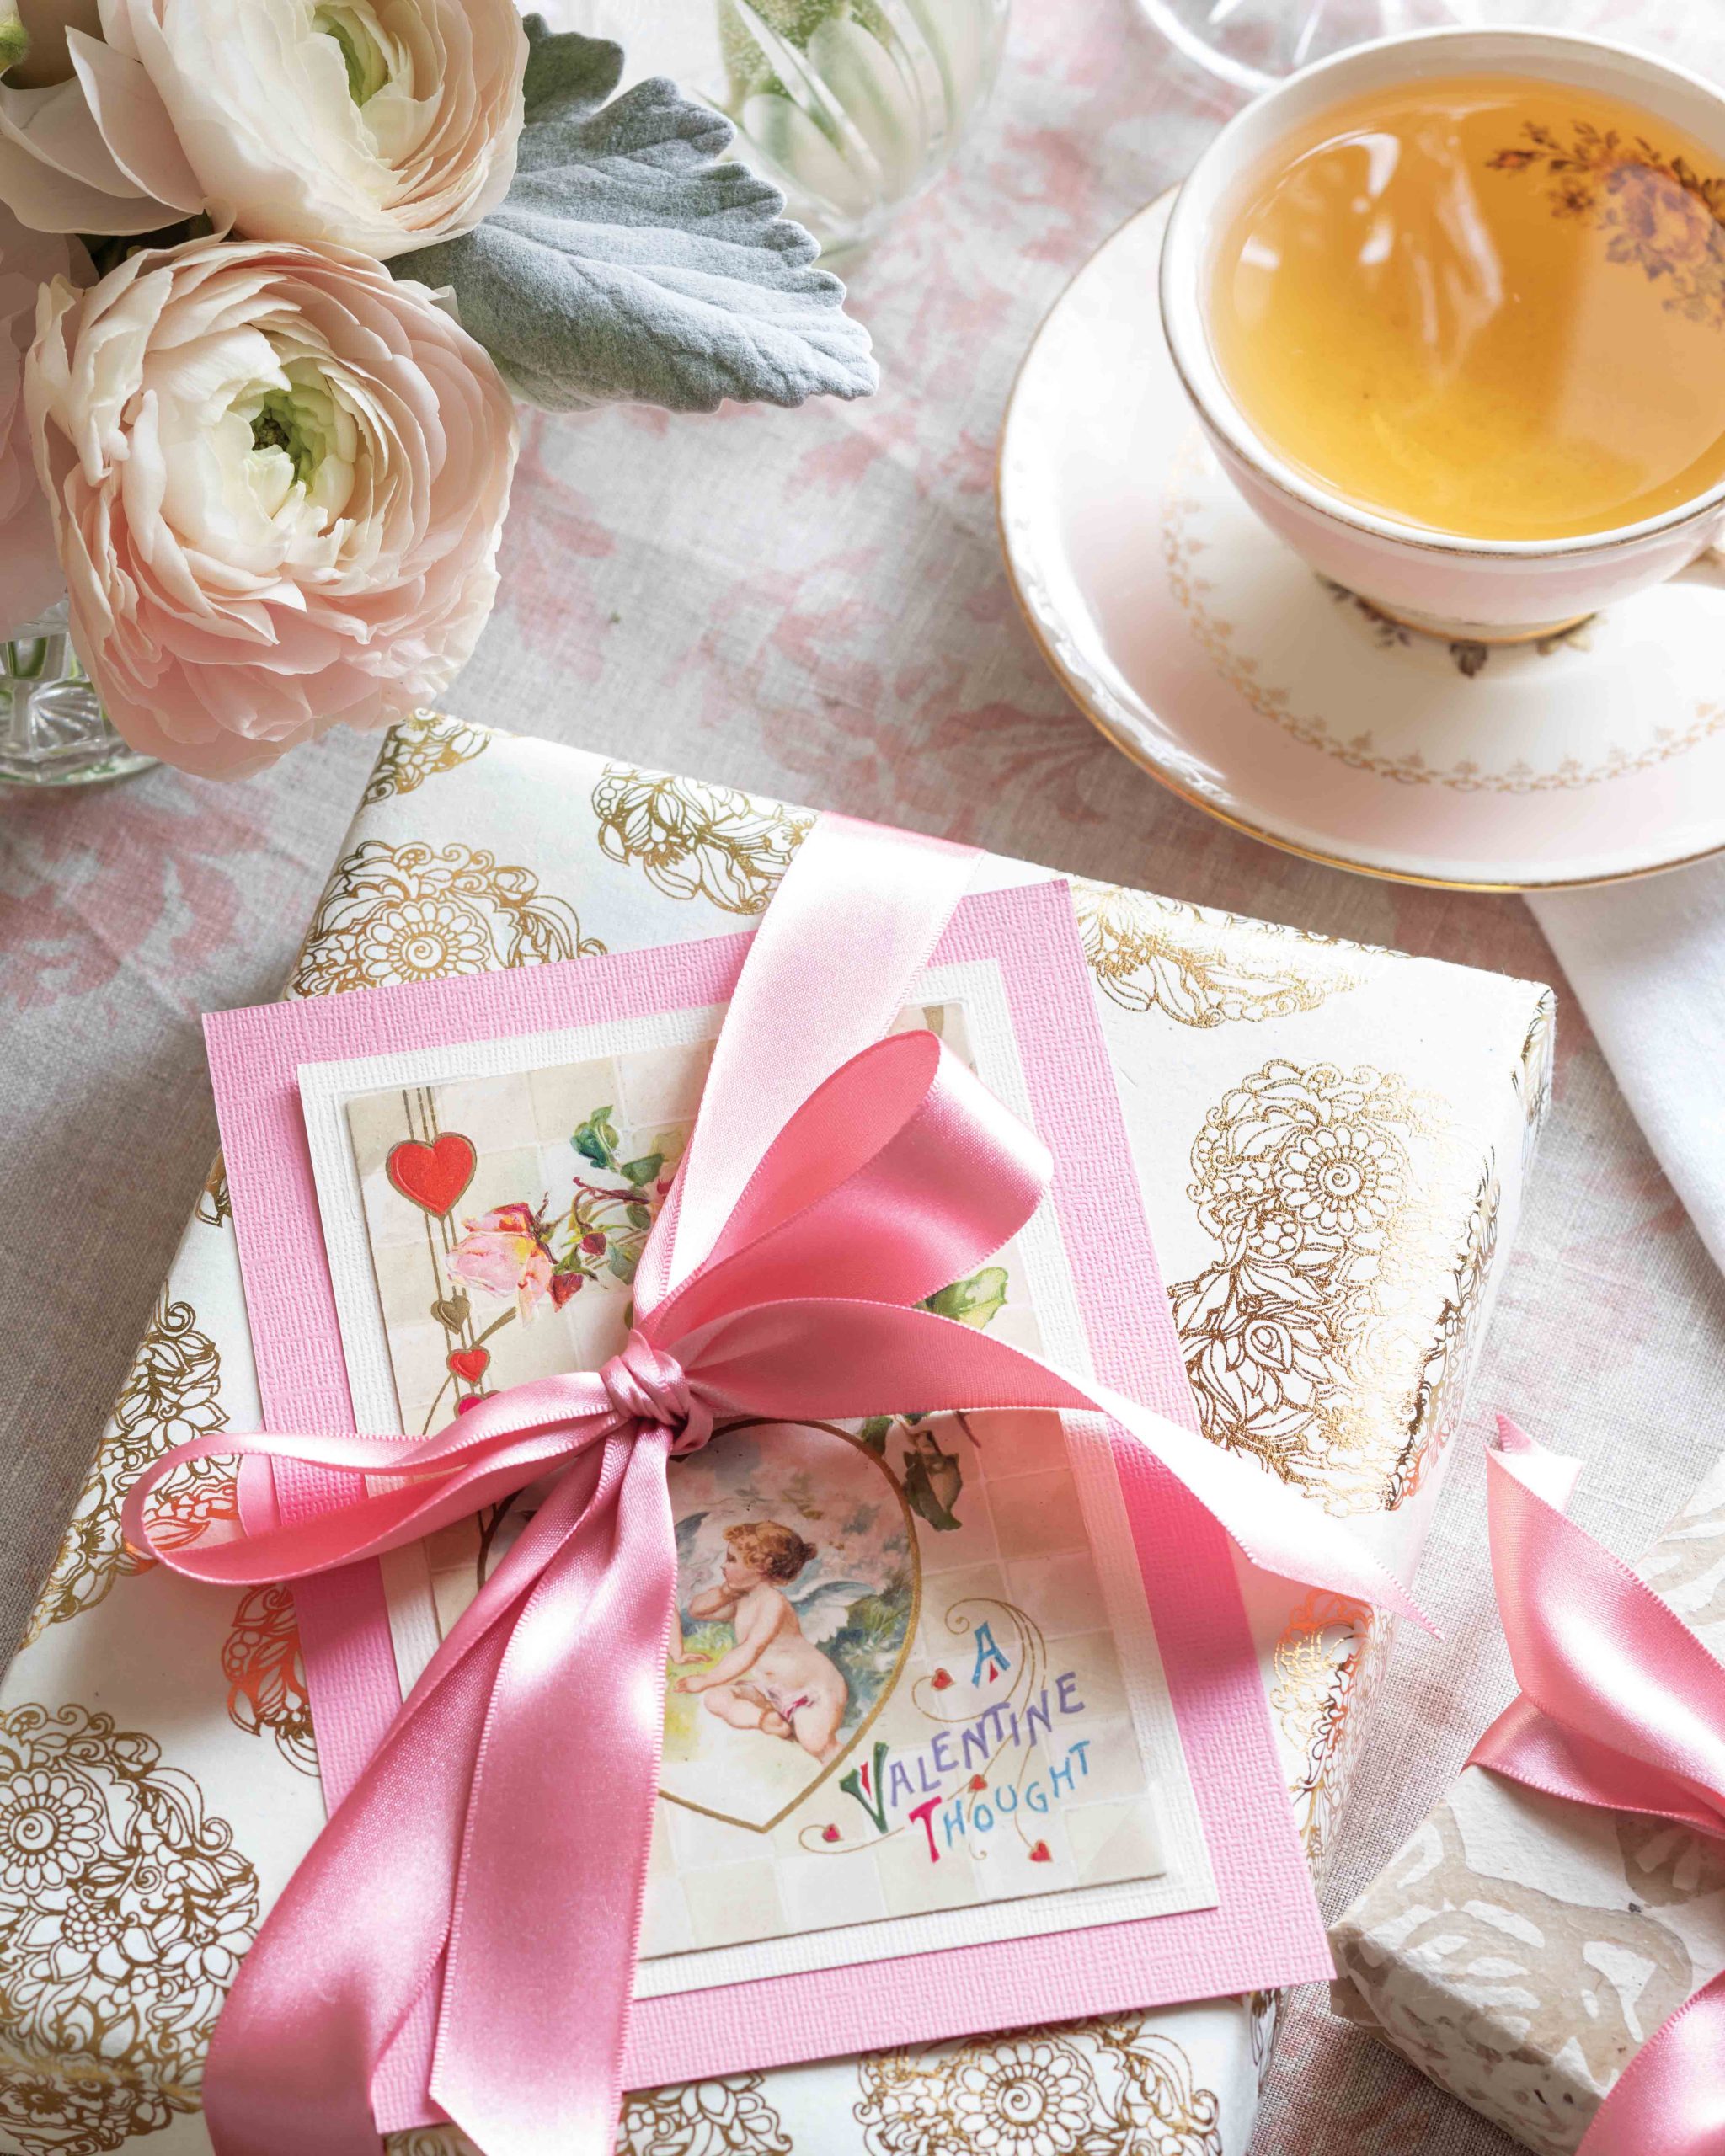 A gift tied with a bright pink ribbon and set beside a rose-colored teacup conceals a romantic card from one’s Valentine tucked into the packaging.